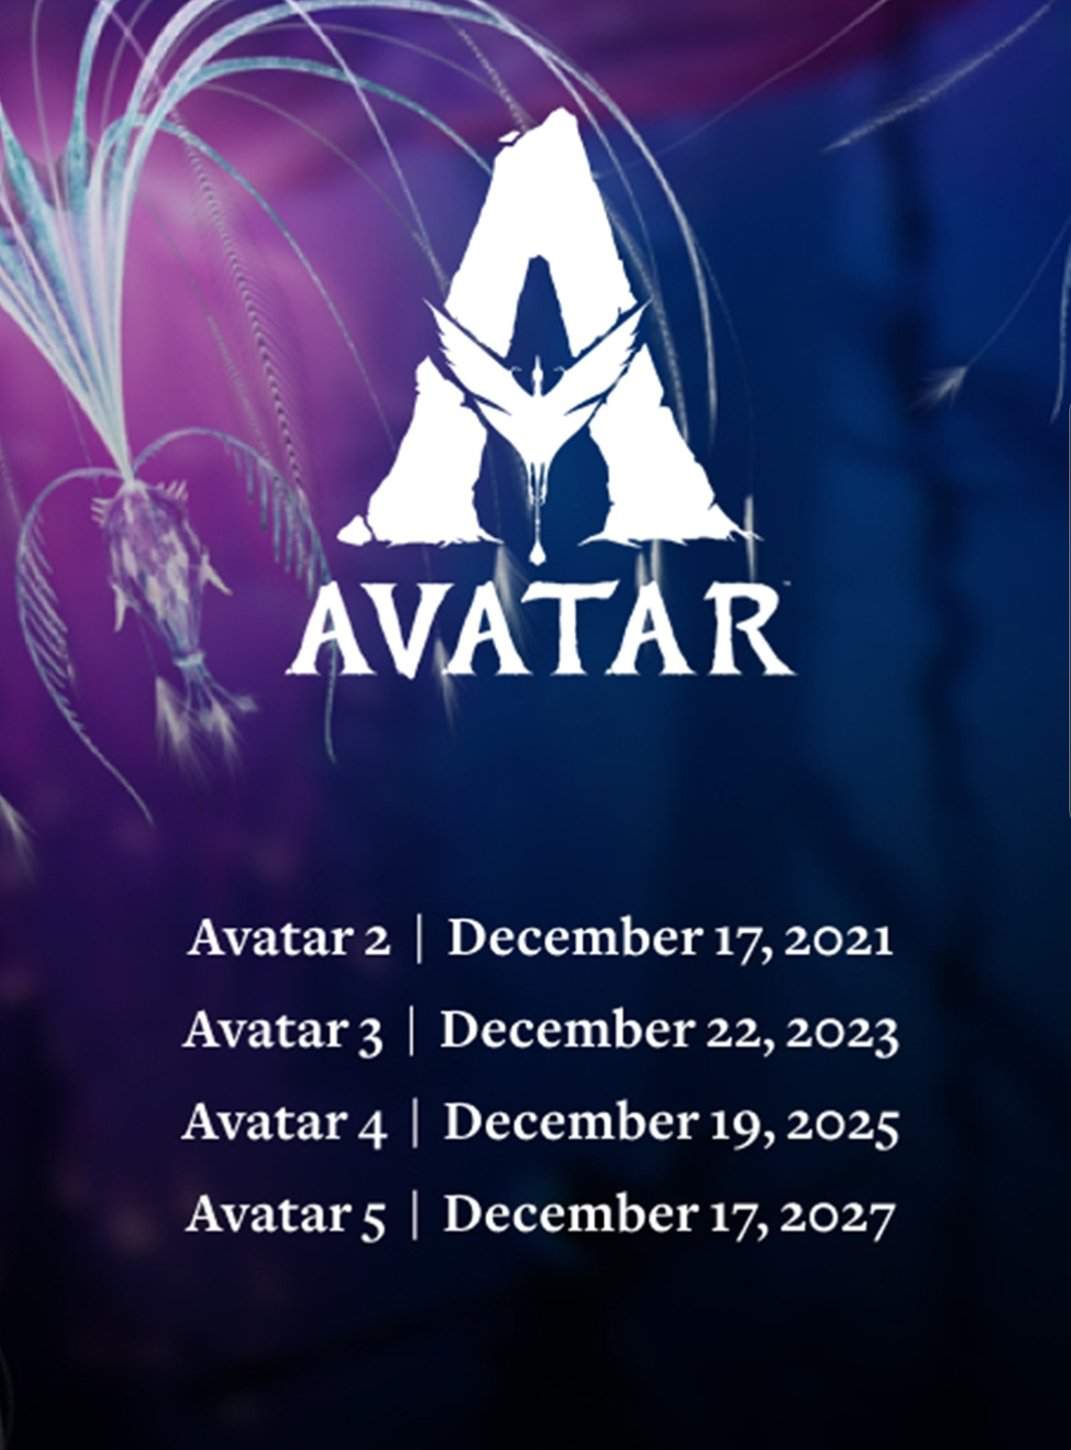 My Thoughts On James Cameron S Four Planned Sequels To Avatar Movies